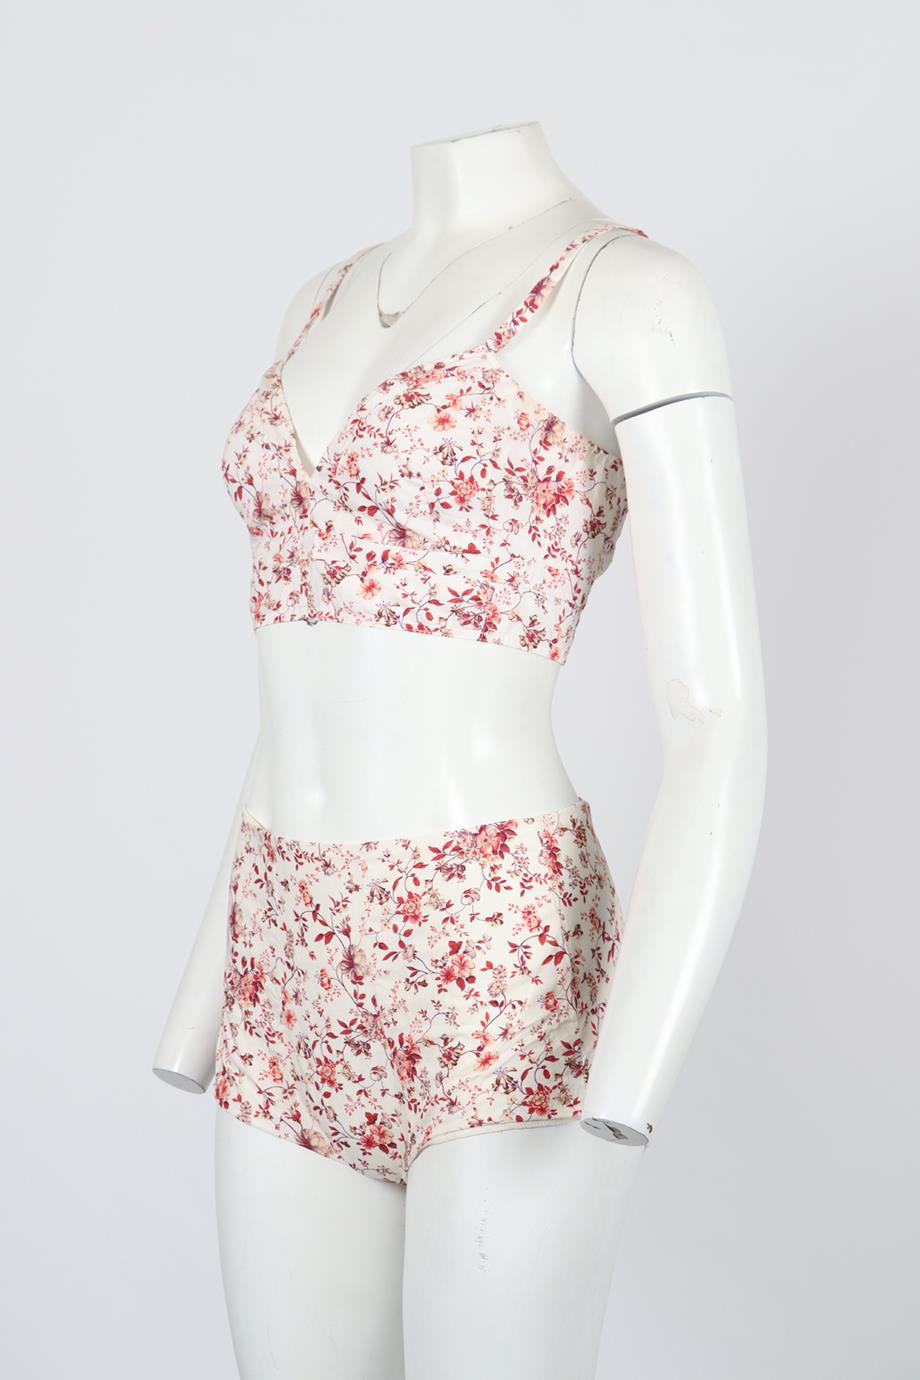 ETRO PRINTED COTTON TOP AND SHORTS IT 40 UK 8